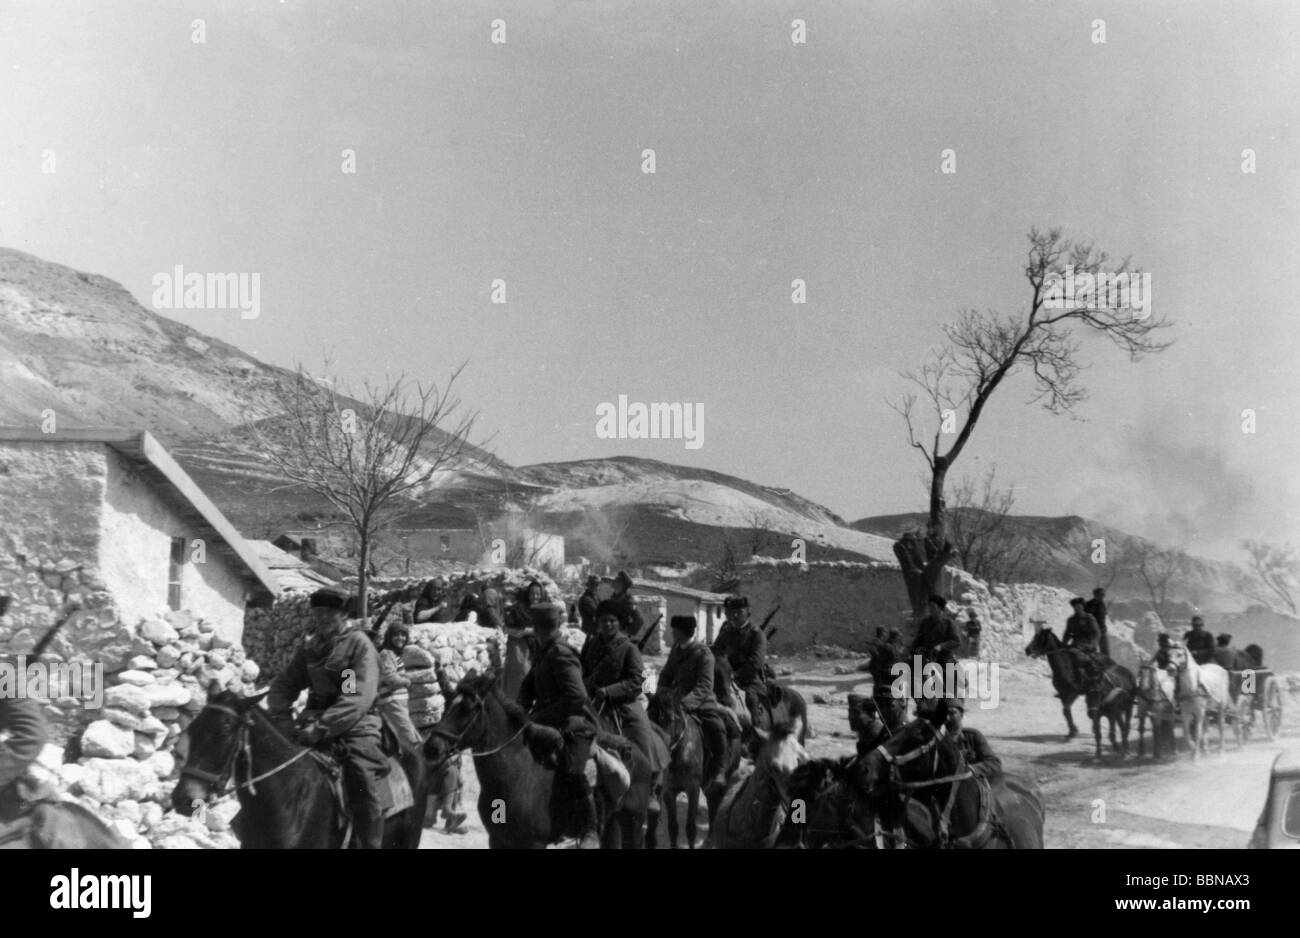 events, Second World War / WWII, Russia 1944 / 1945, Crimea, German soldiers and Cossacks near Sevastopol, April 1944, 20th century, historic, historical, Eastern Front, USSR, Soviet Union, Ukraine, Wehrmacht, Third Reich, military, foreigners in German service, civilians, women, cavalry, riders, people, 1940s, Stock Photo